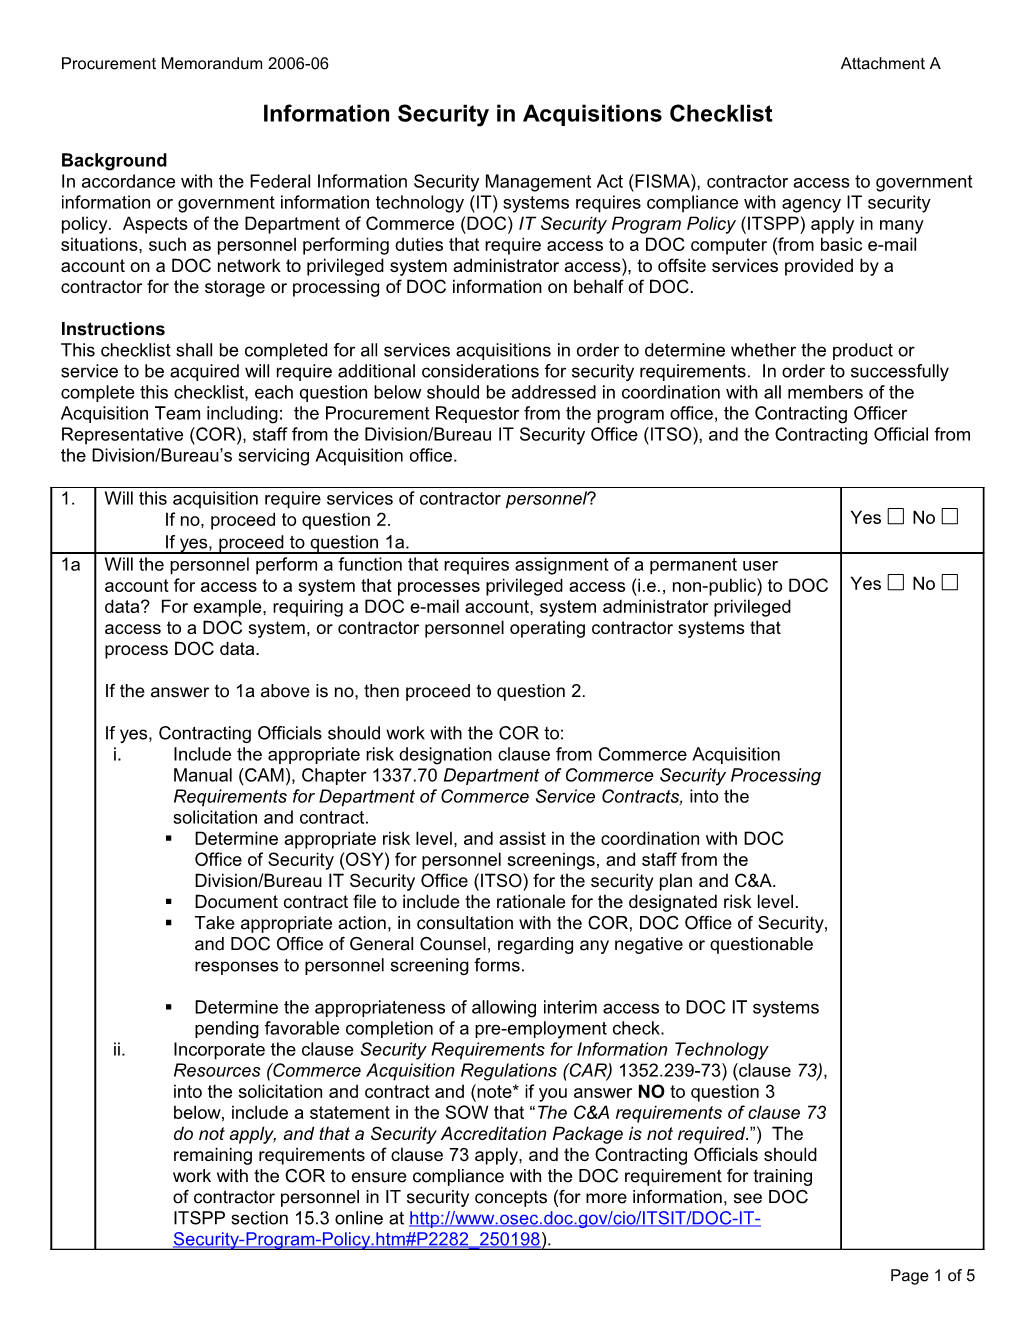 NOAA Section 508 Standards Checklist And